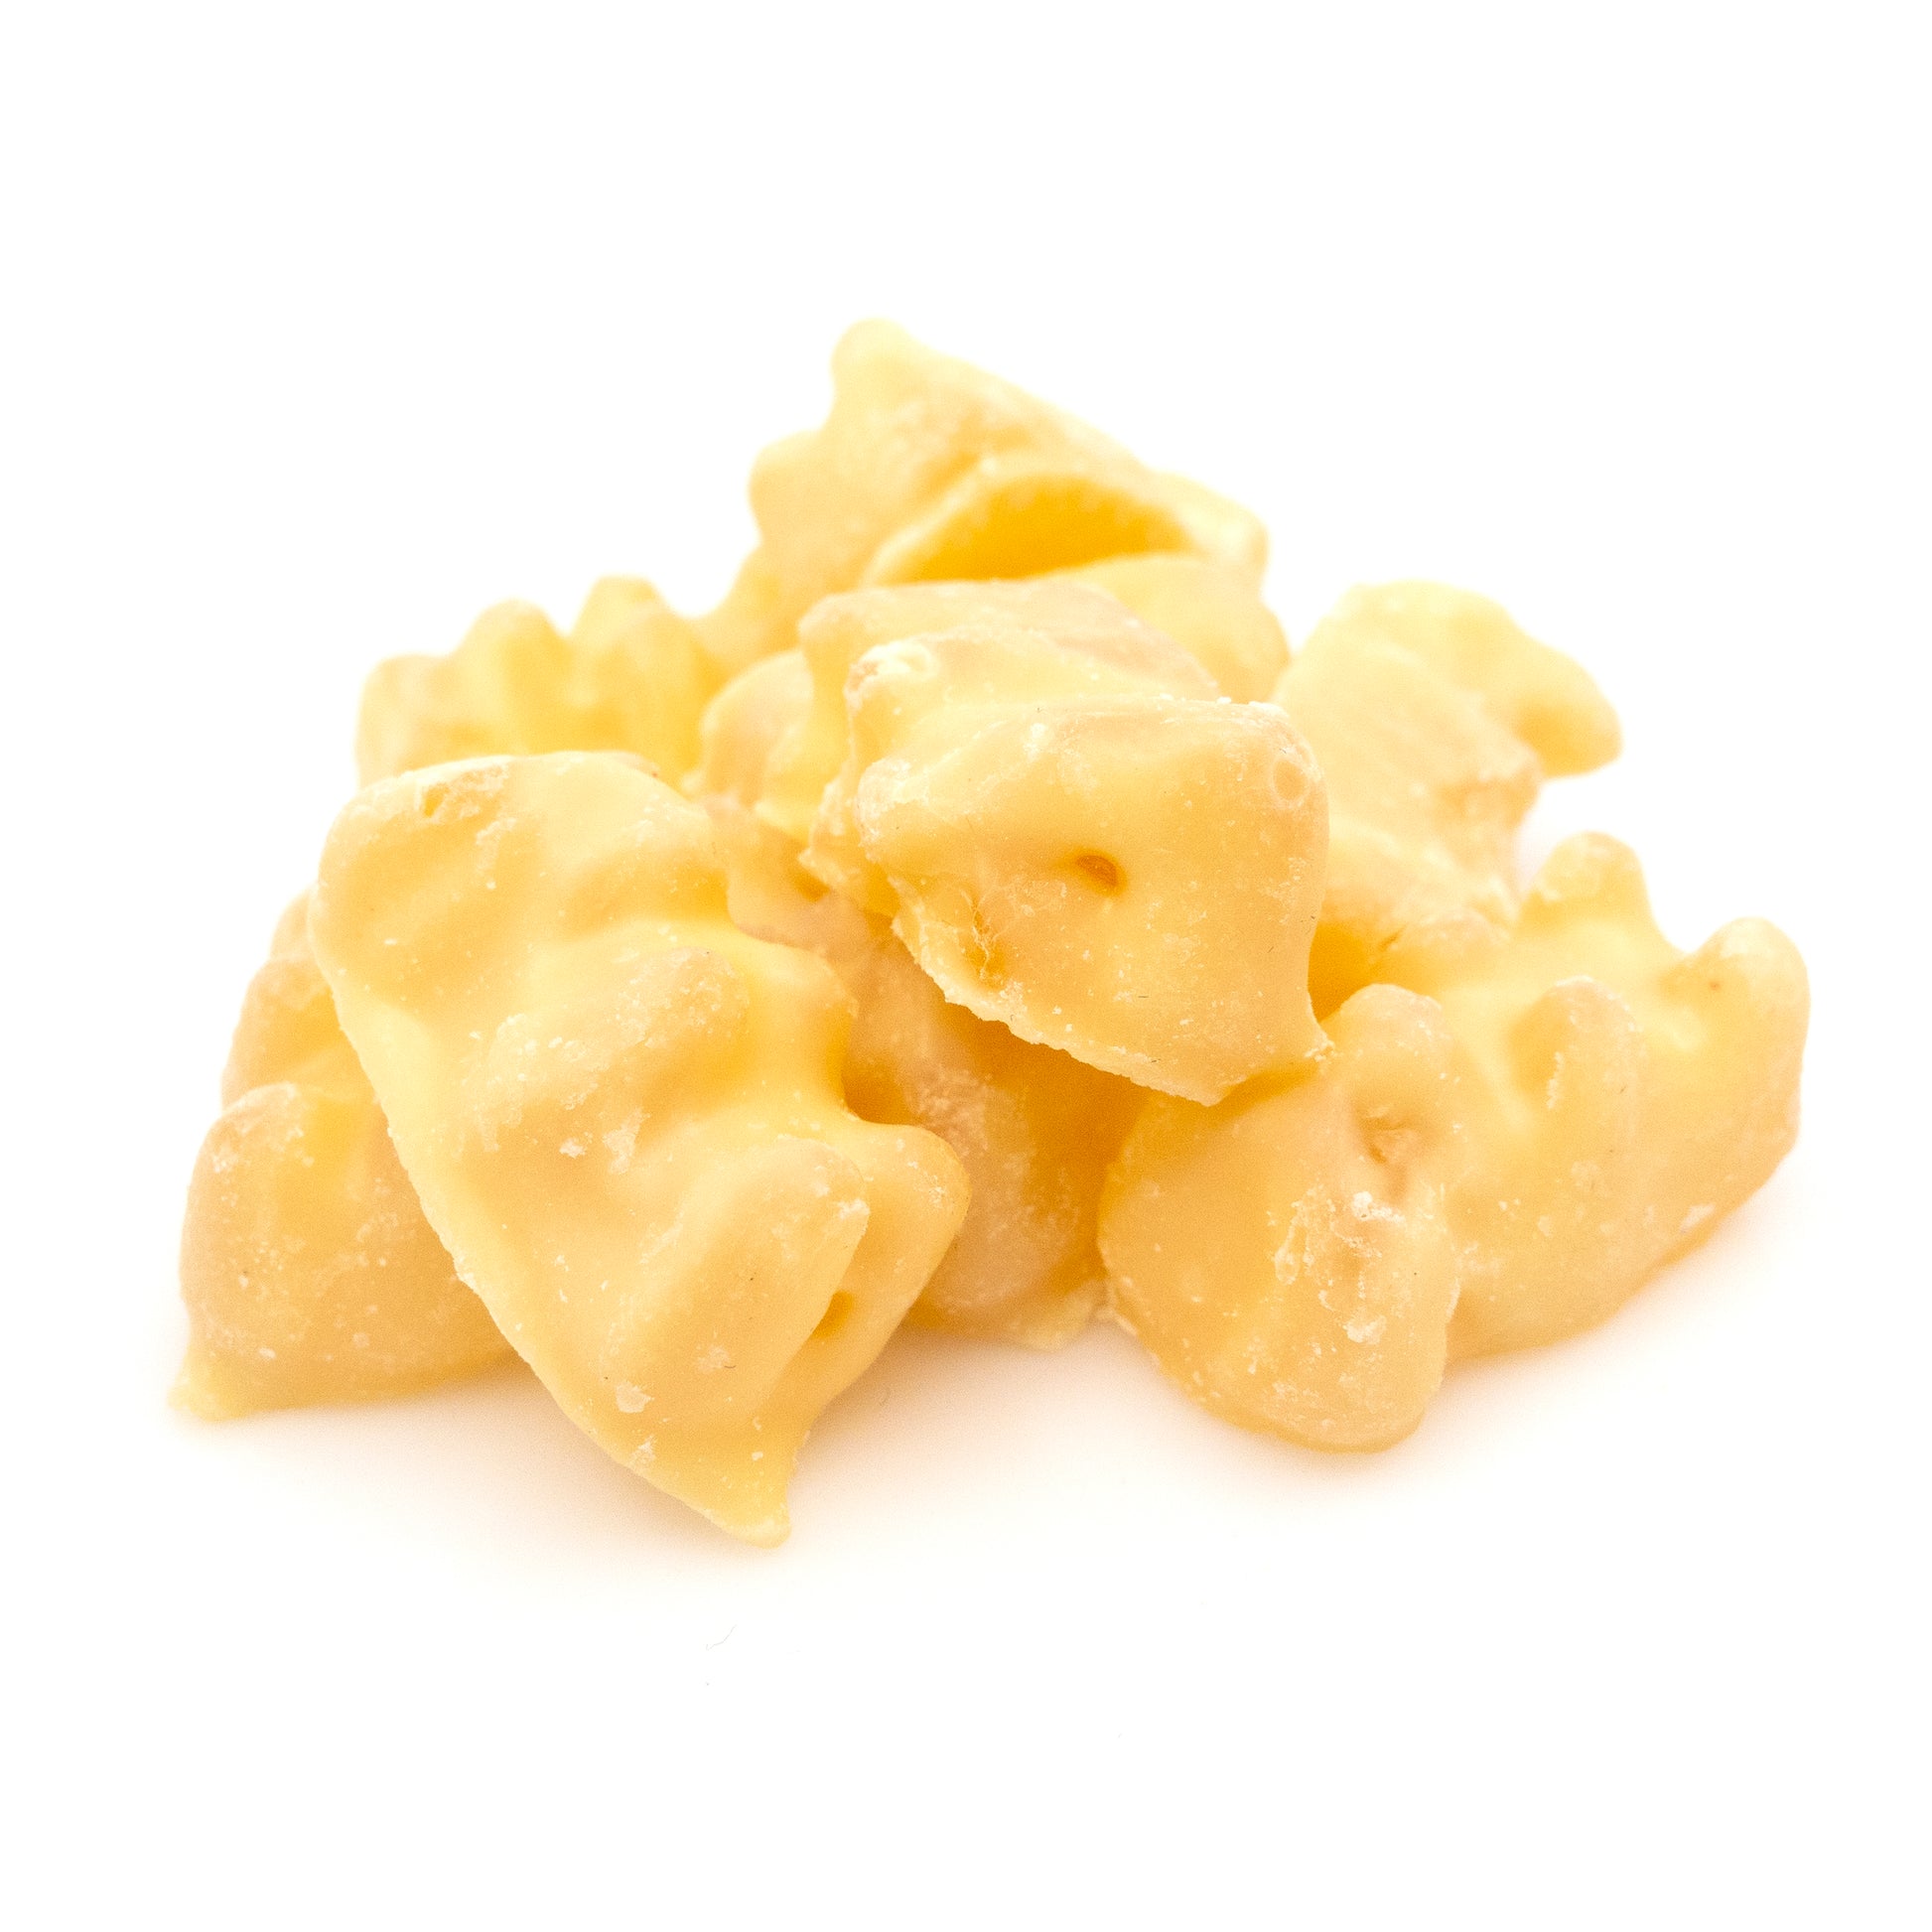 White Chocolate Gummy Bears - Wholesale Unlimited Inc.